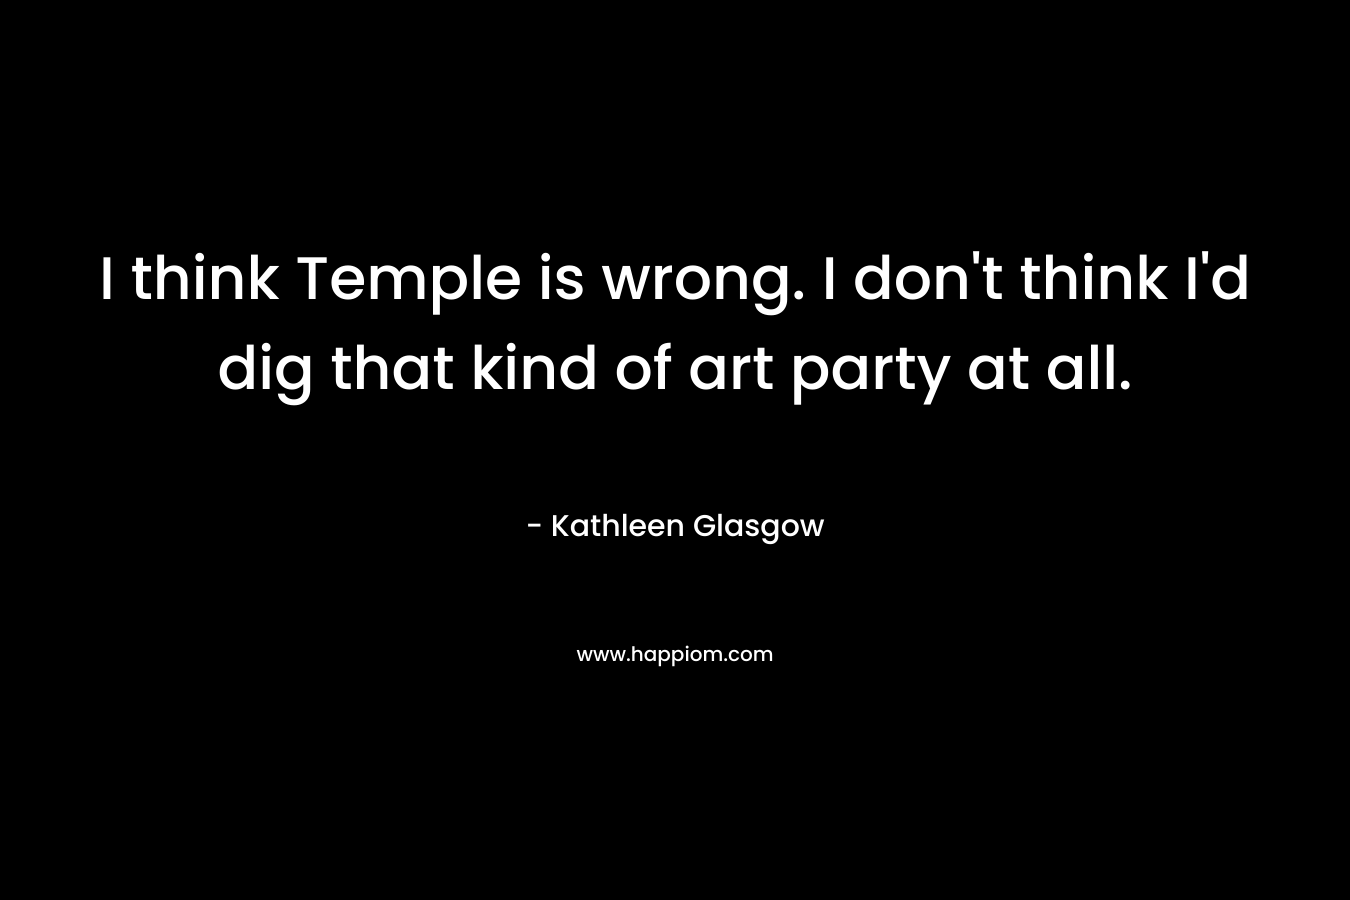 I think Temple is wrong. I don't think I'd dig that kind of art party at all.